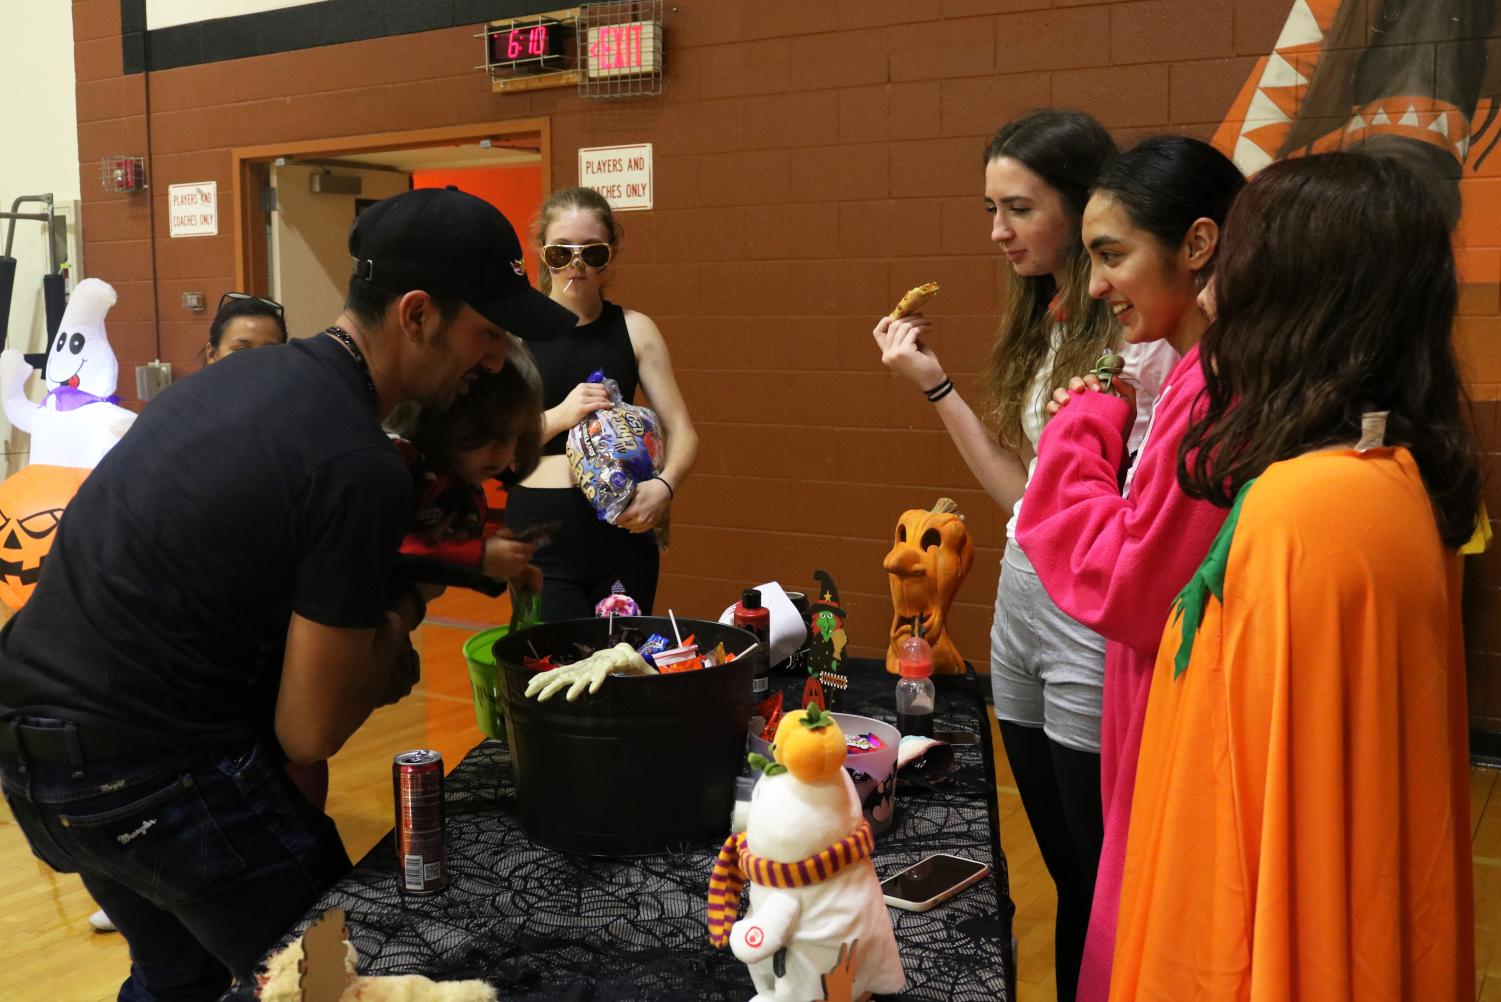 Campus+Organizations+Strengthen+Community+at+%E2%80%98Trunk-or-Treat%E2%80%99+Halloween+Event